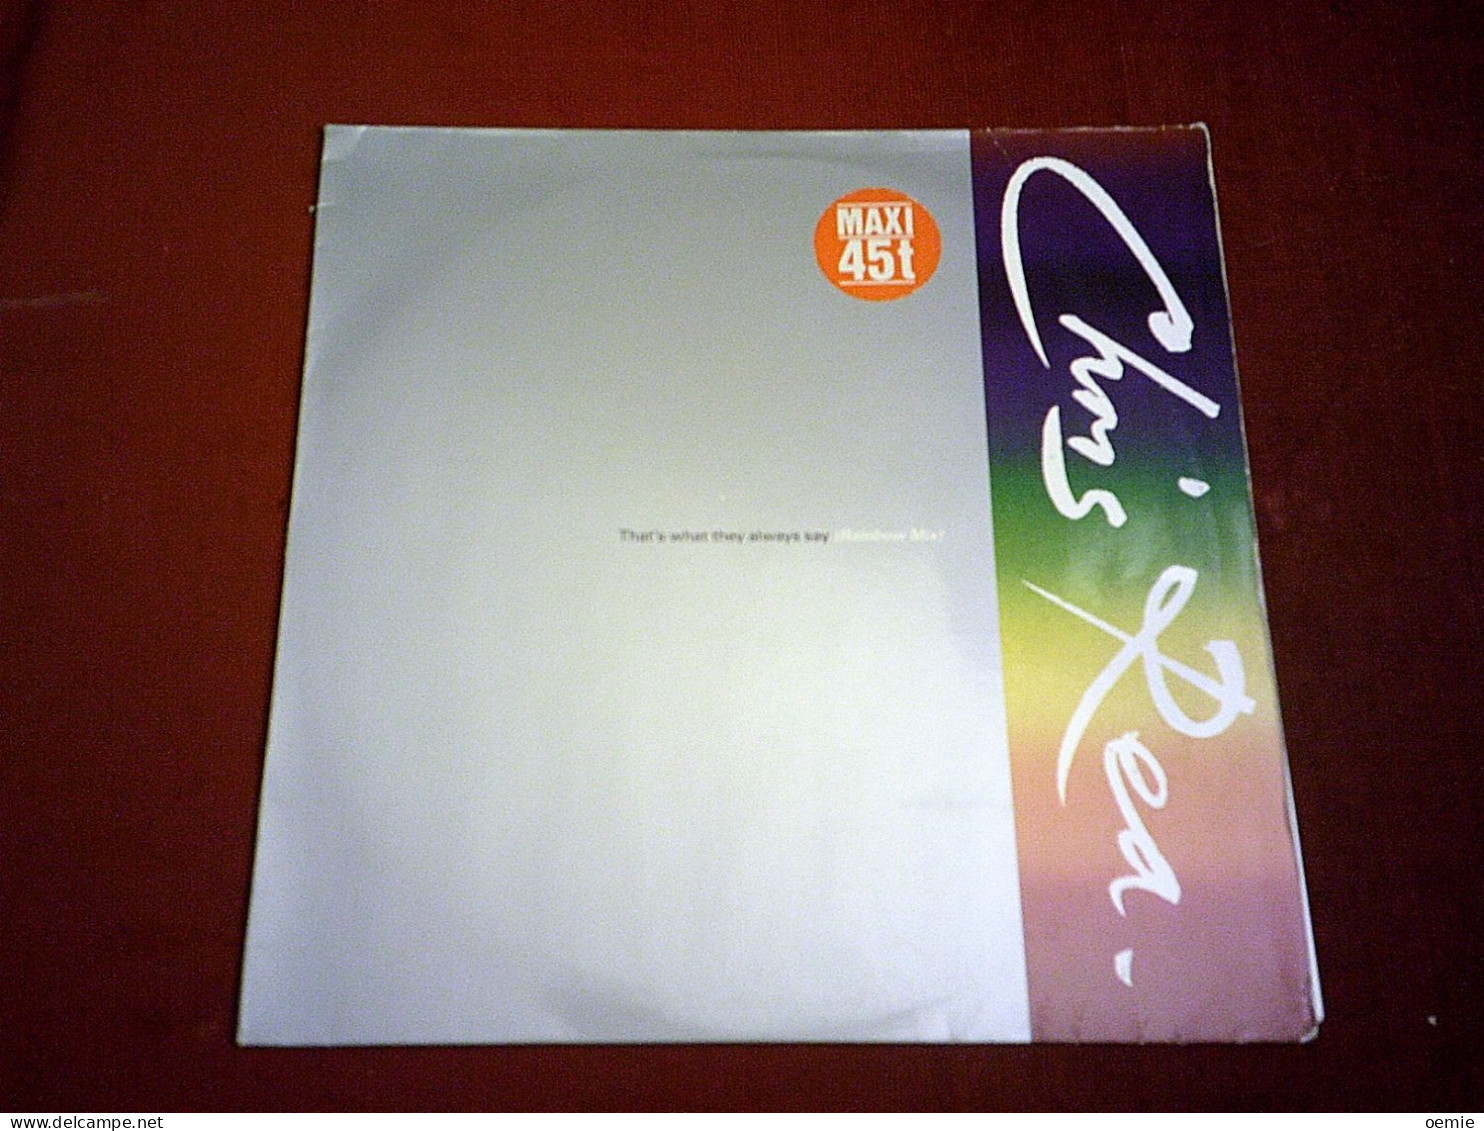 CHRIS REA   / THAT'S WHAT THEY ALWAYS SAY ( RAINBOW MIX ) - 45 Rpm - Maxi-Single